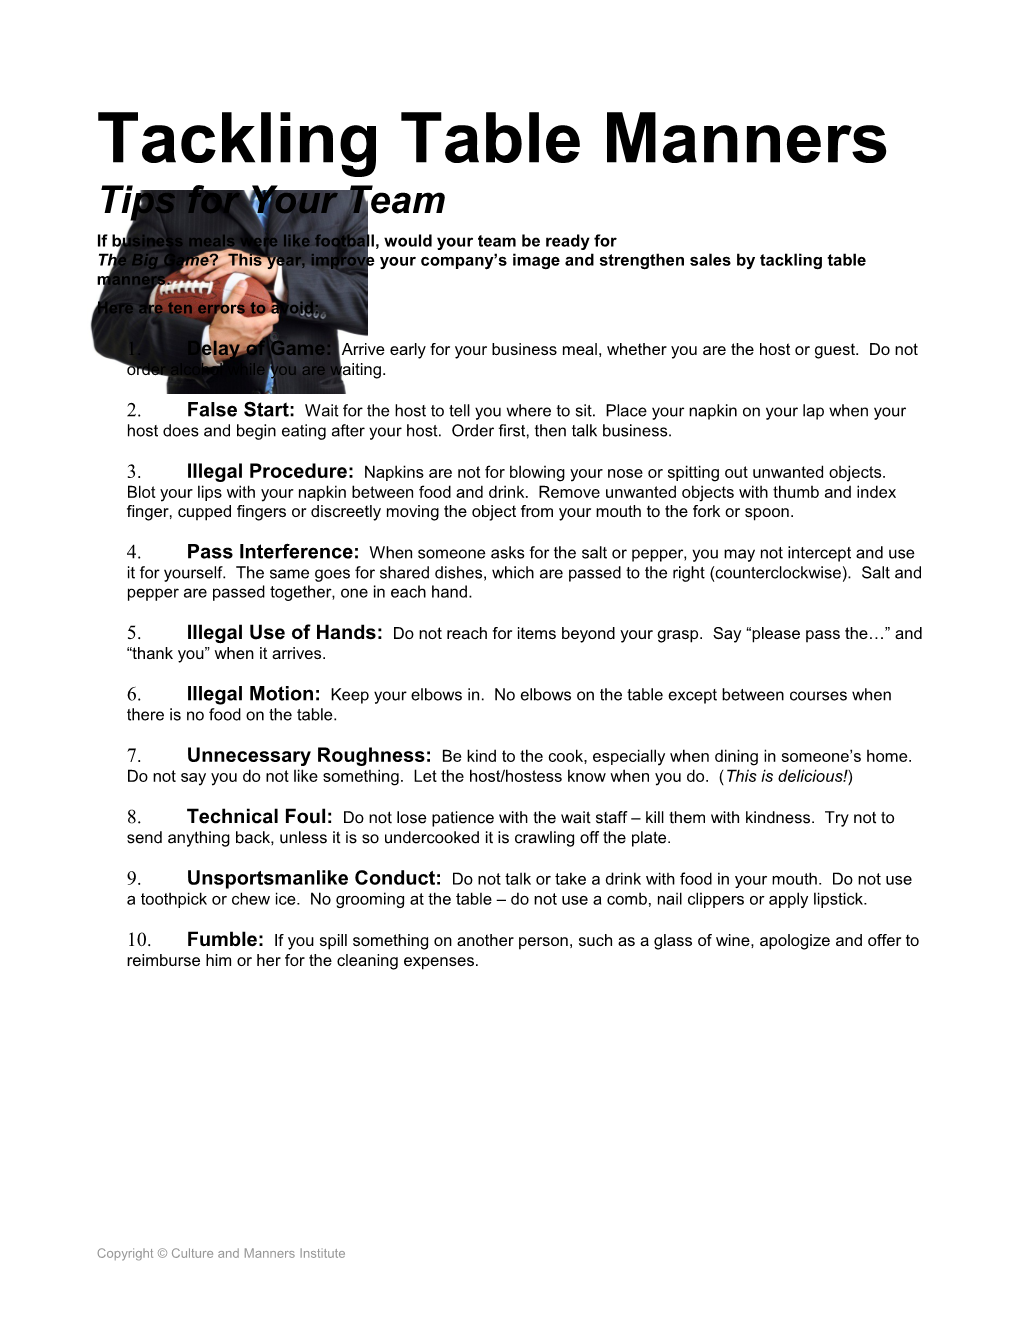 Article What Your Children 5 and up Should Know About Table Manners (For Thanksgiving)